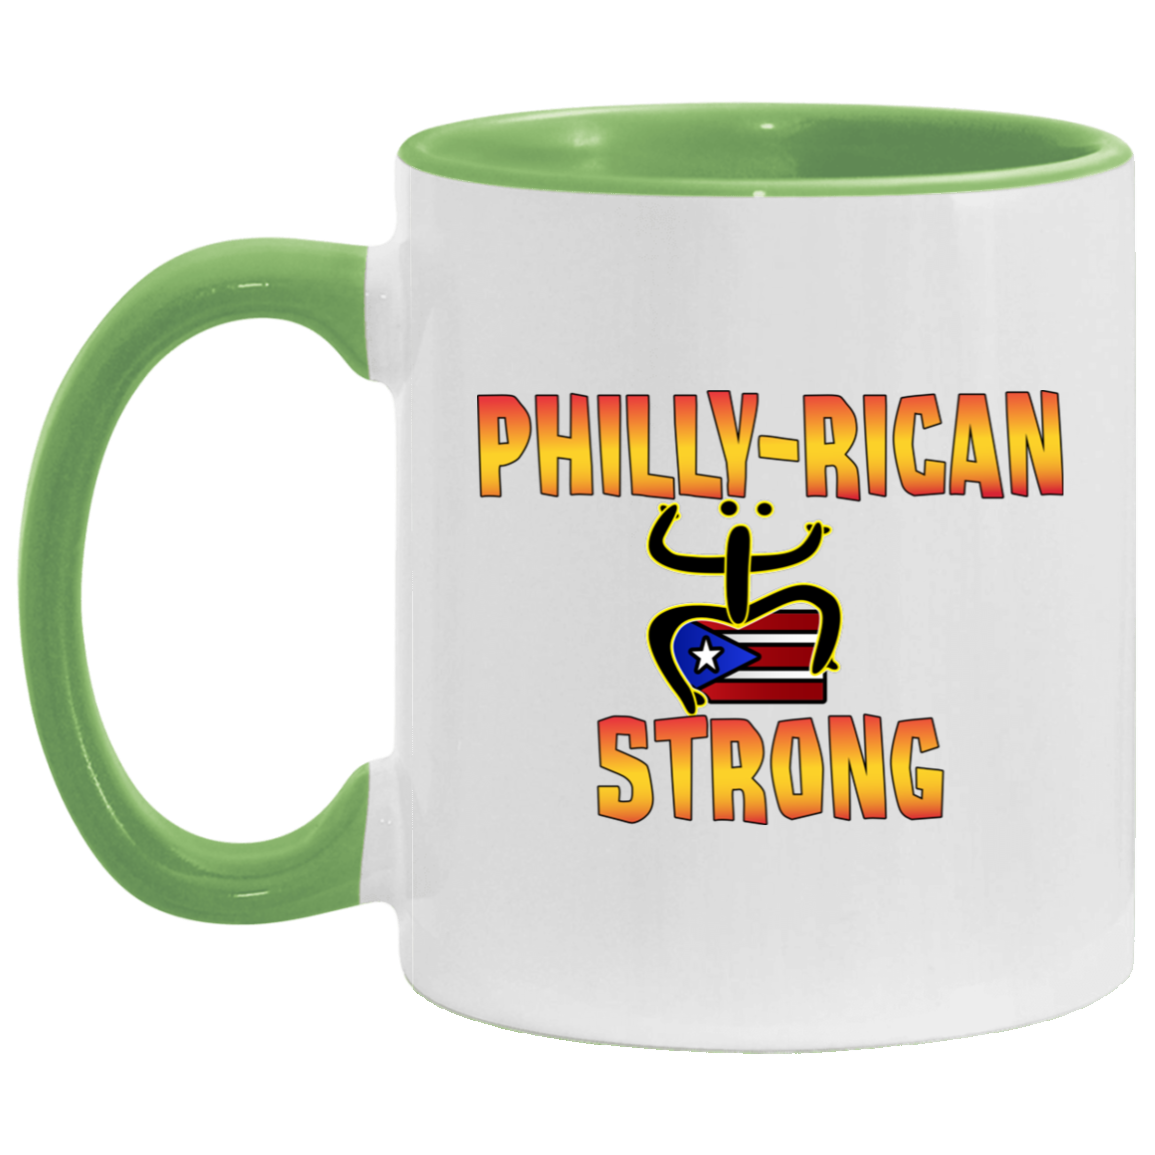 Philly-Rican Strong 11OZ Accent Mug - Puerto Rican Pride